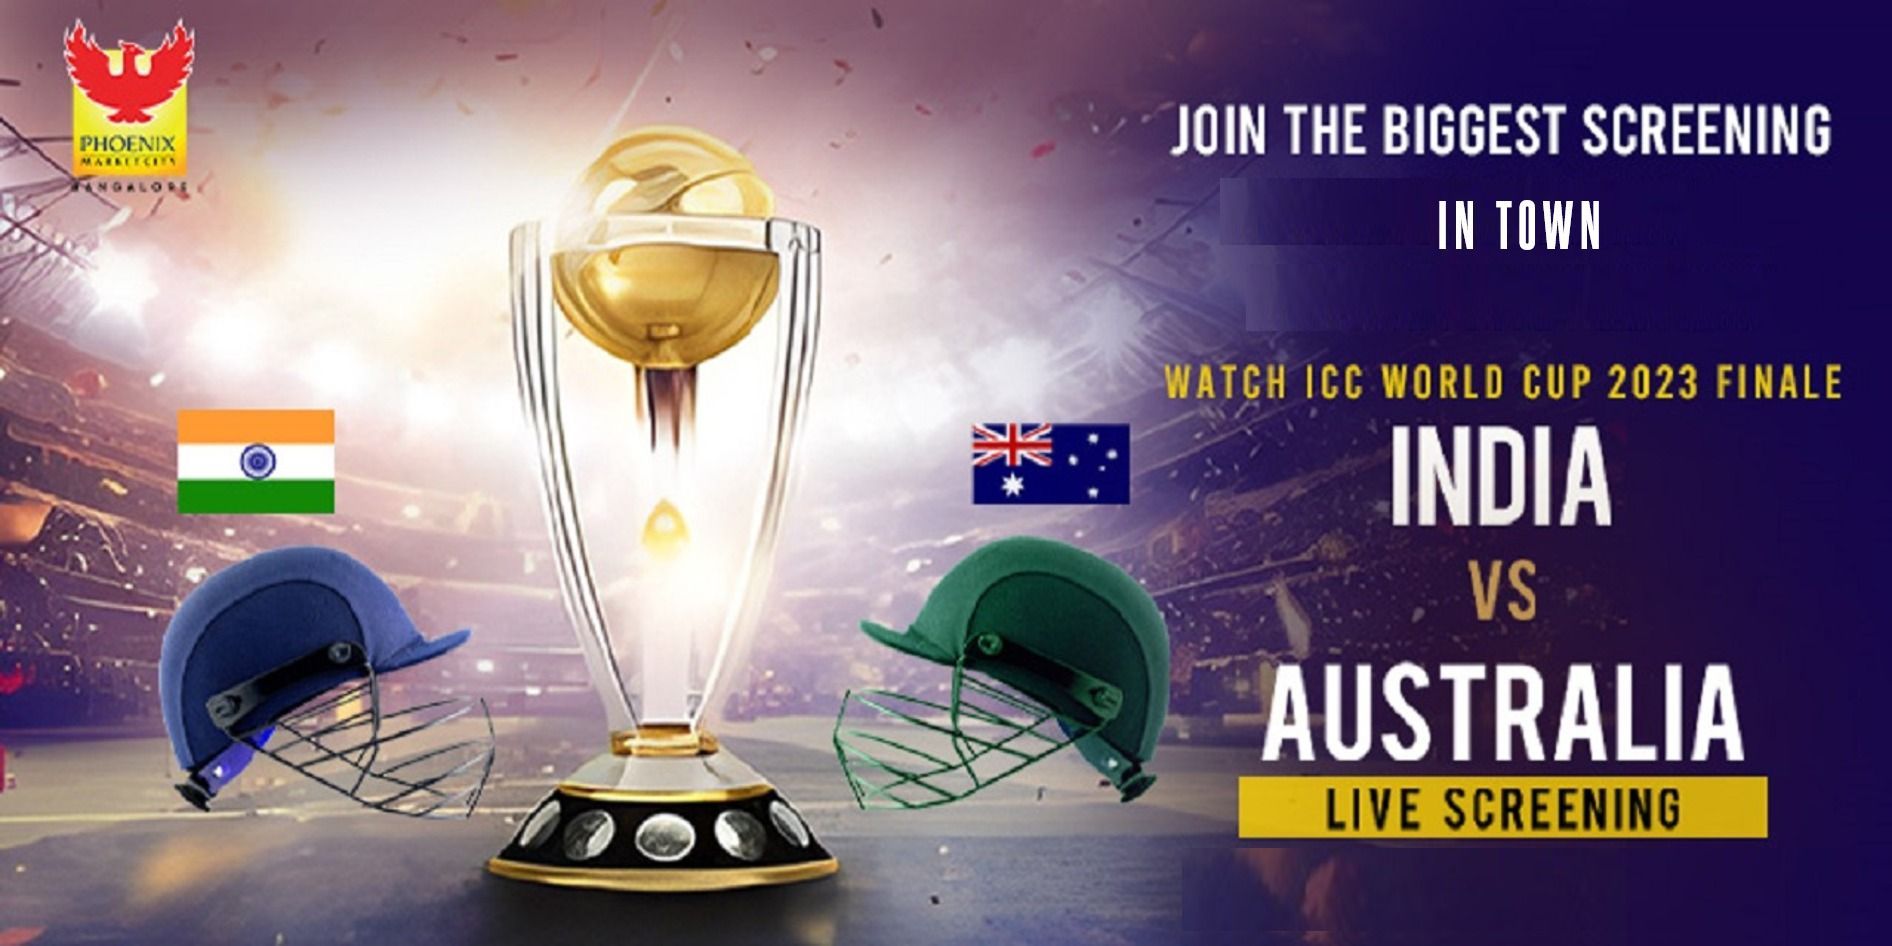 ICC Mens World Cup 2023 FINALE LIVE SCREENING cricket Event Tickets BookMyShow